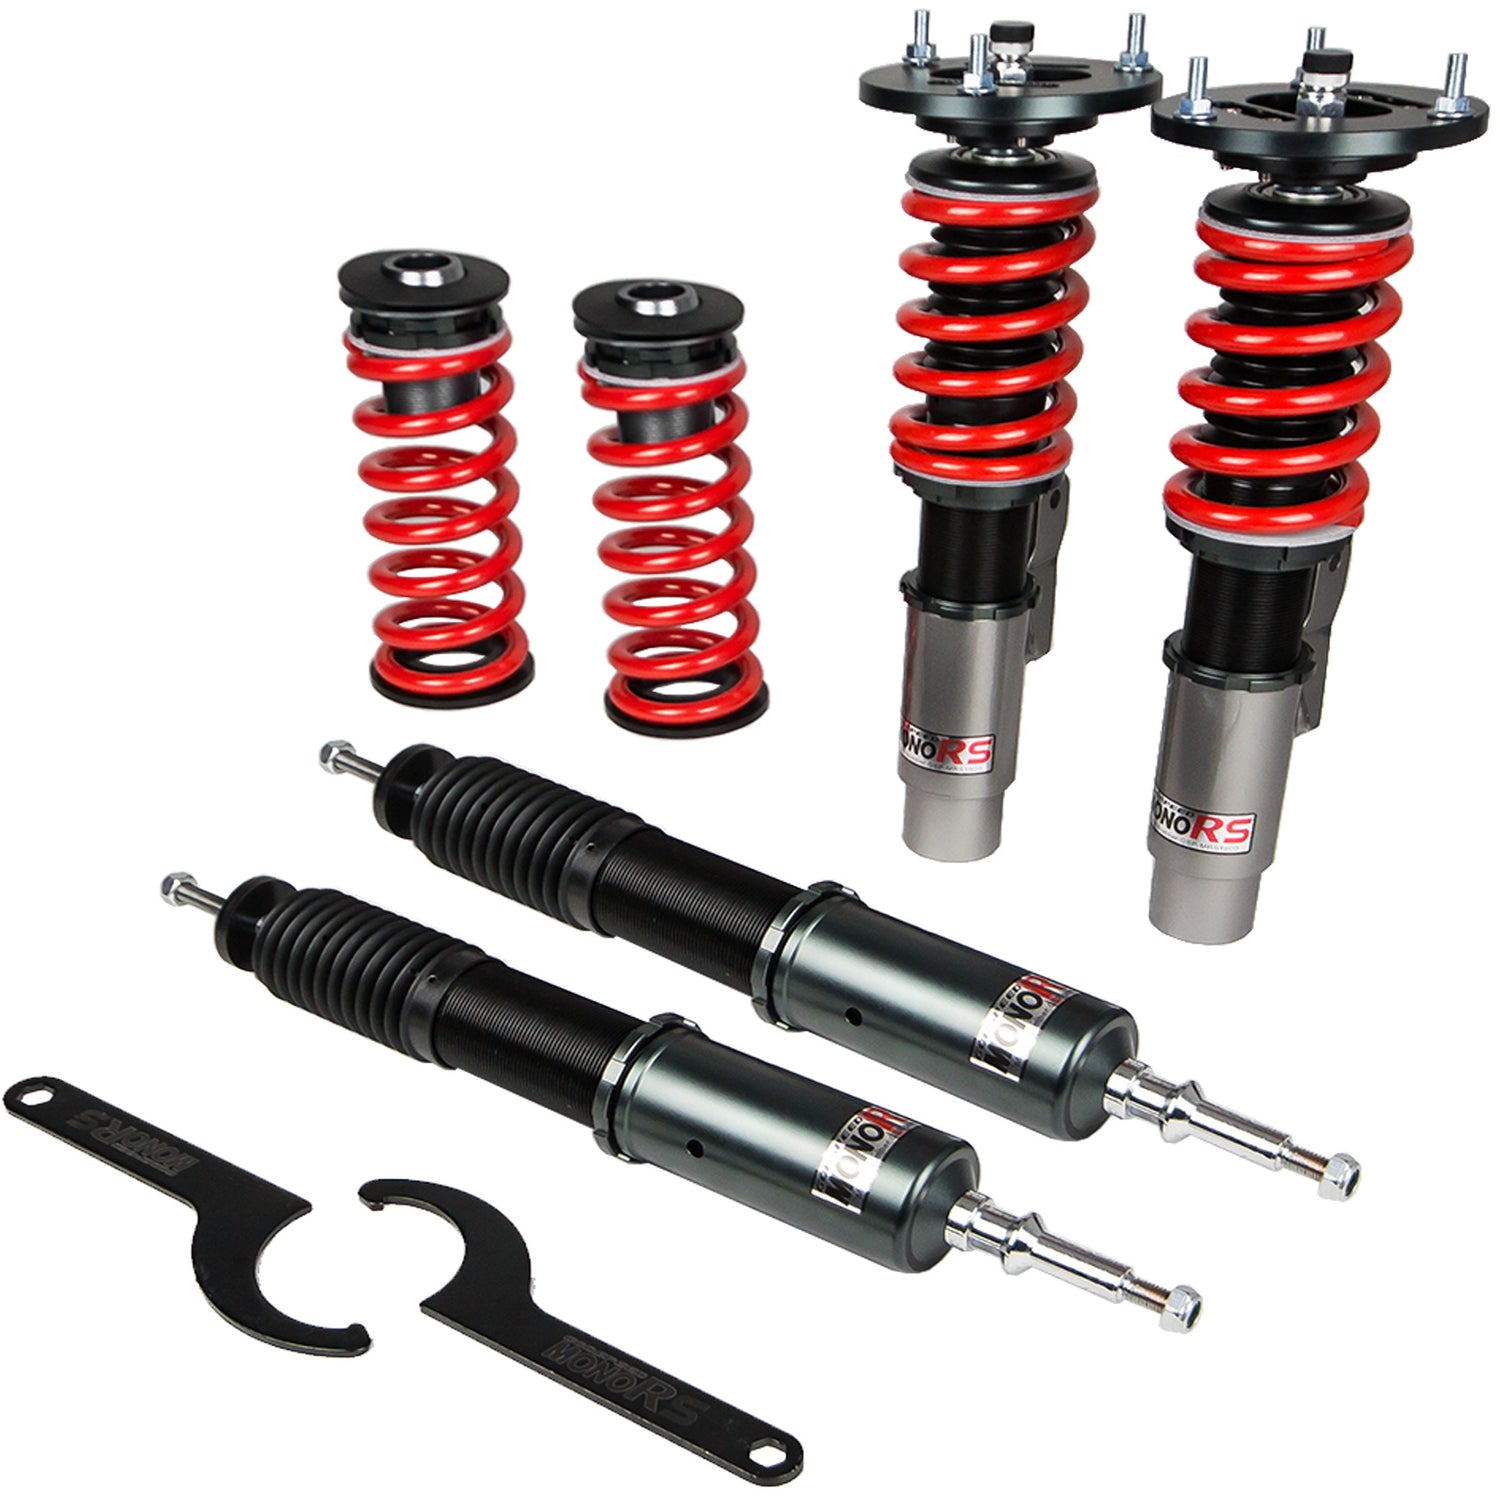 Godspeed MRS1900 MonoRS Coilover Lowering Kit, 32 Damping Adjustment, Ride Height Adjustable